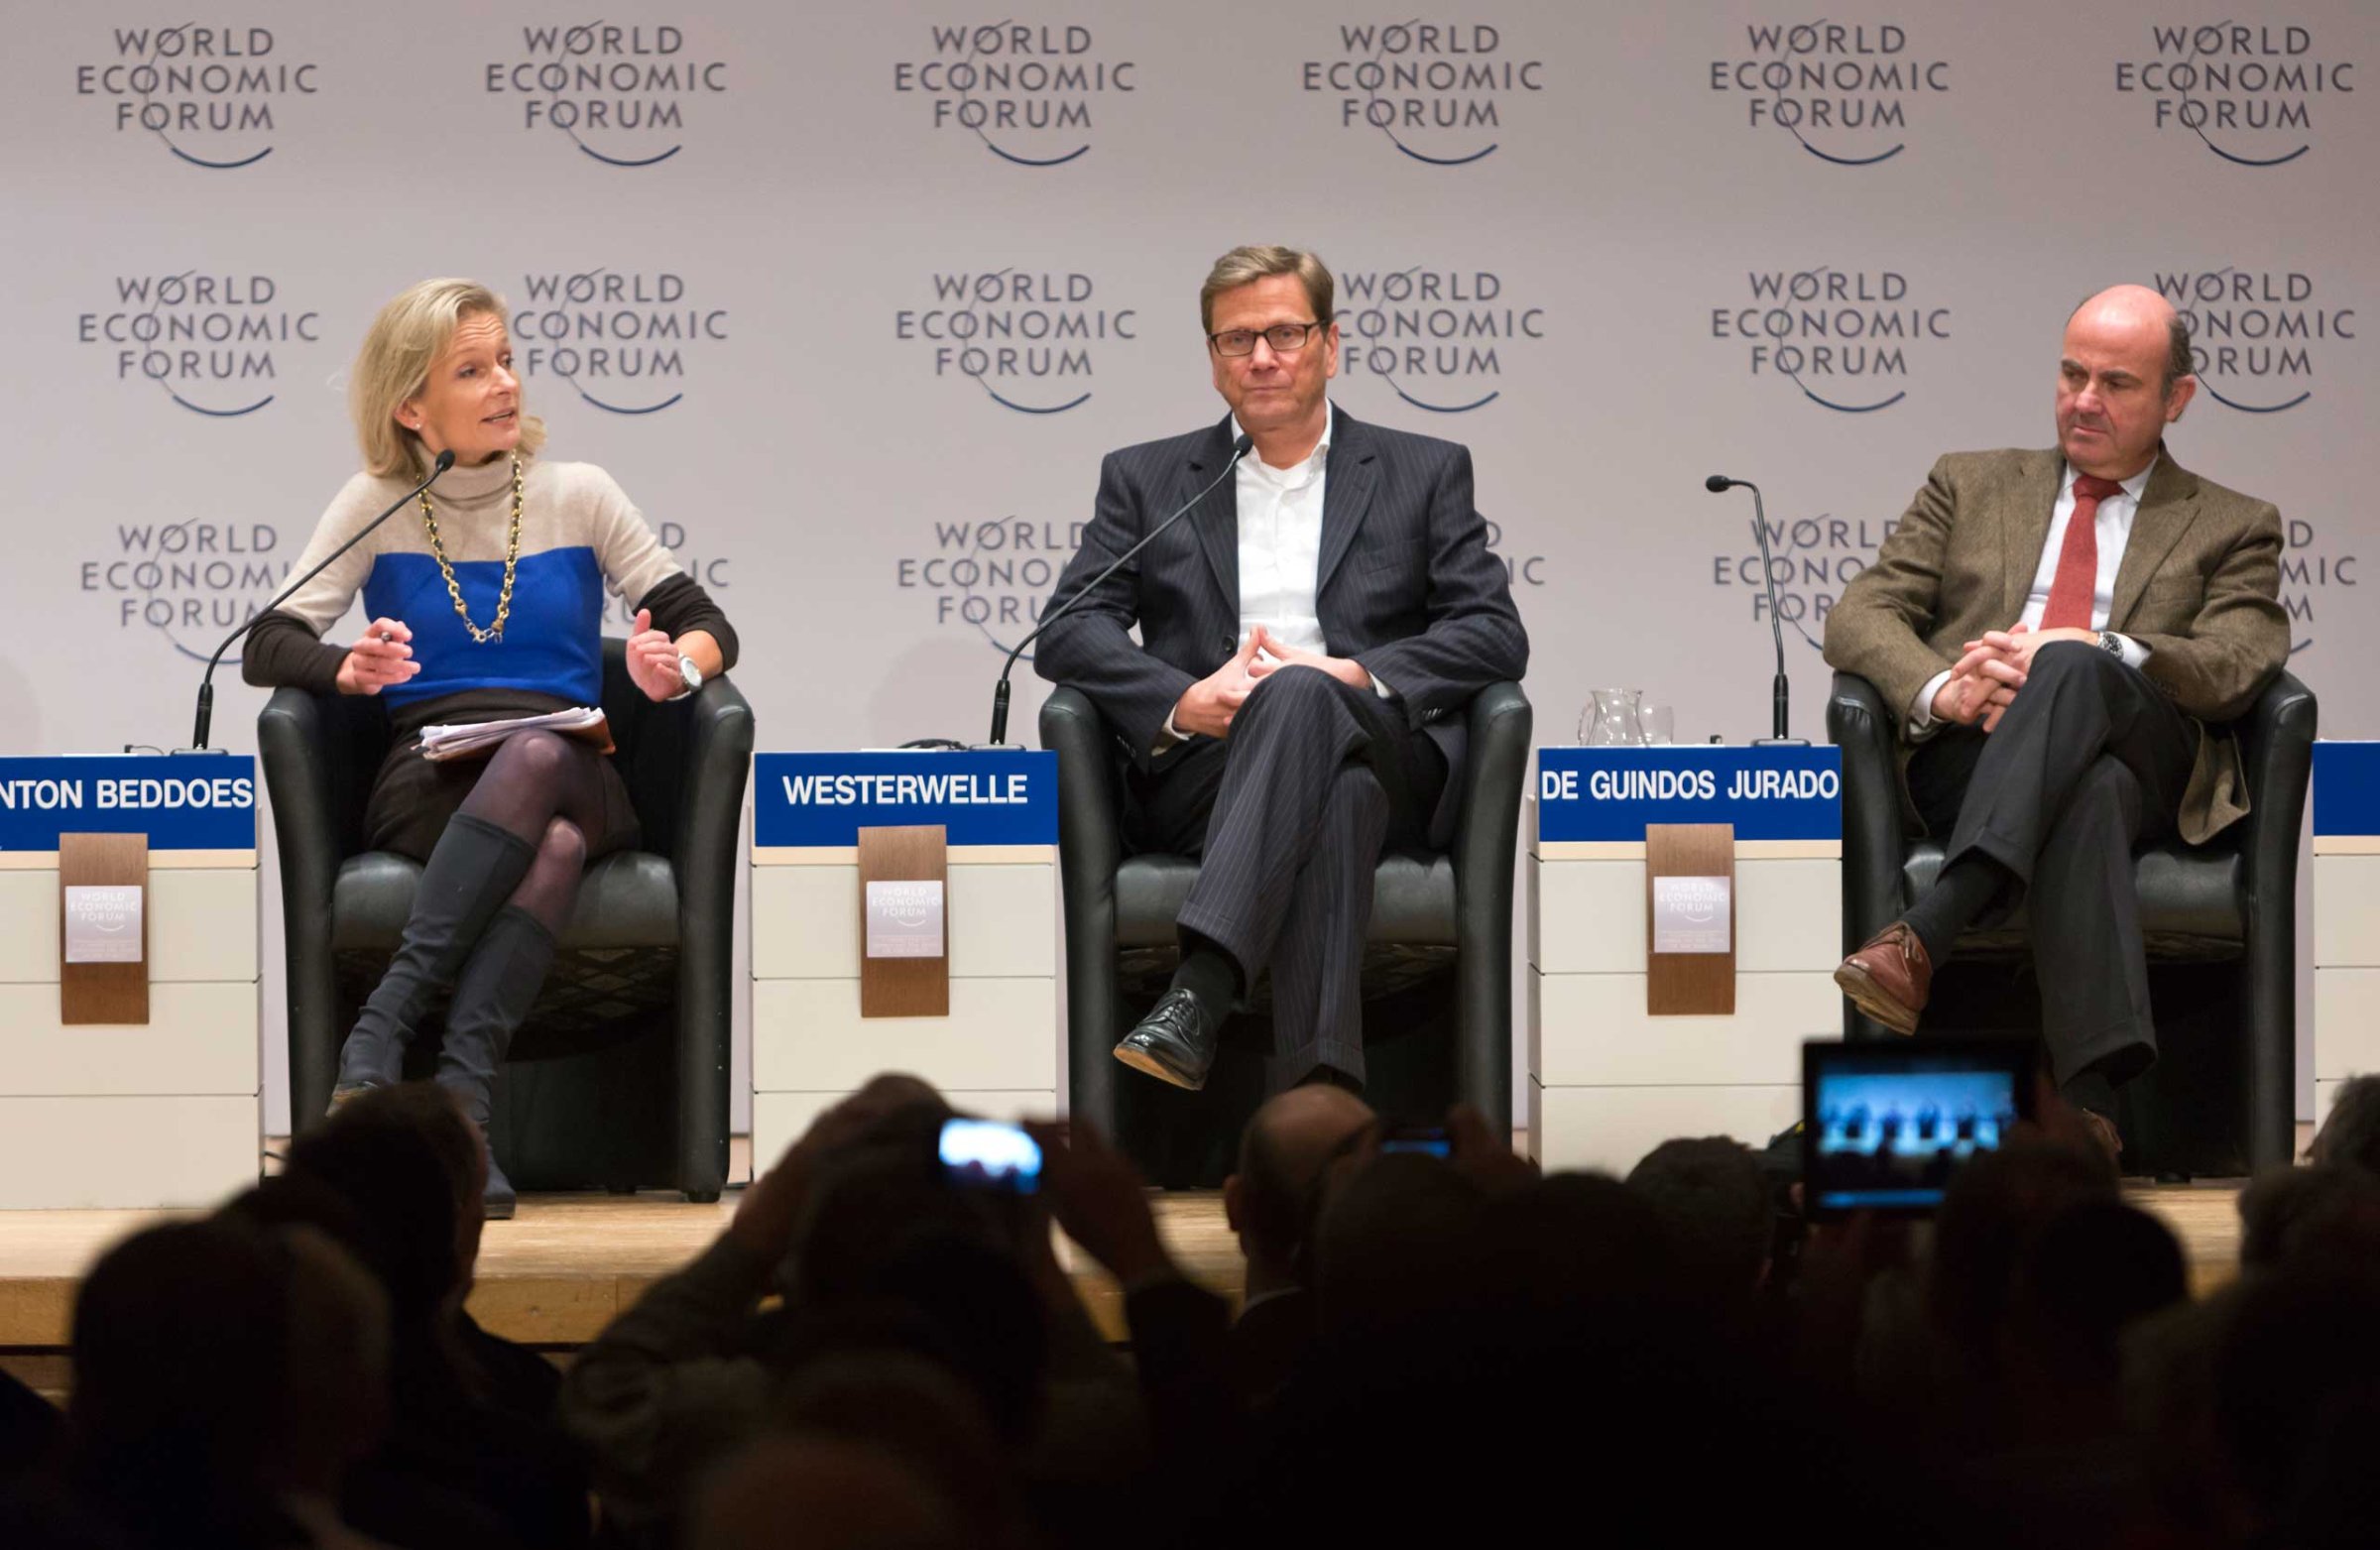 German Foreign Minister Guido Westerwelle speaks during a forum session at the World Economic Forum, with Moderator Zanny Minton Beddoes and Luis de Guindos Jurado, Spanish Minister for Economy, on Jan. 25, 2013 in Davos.